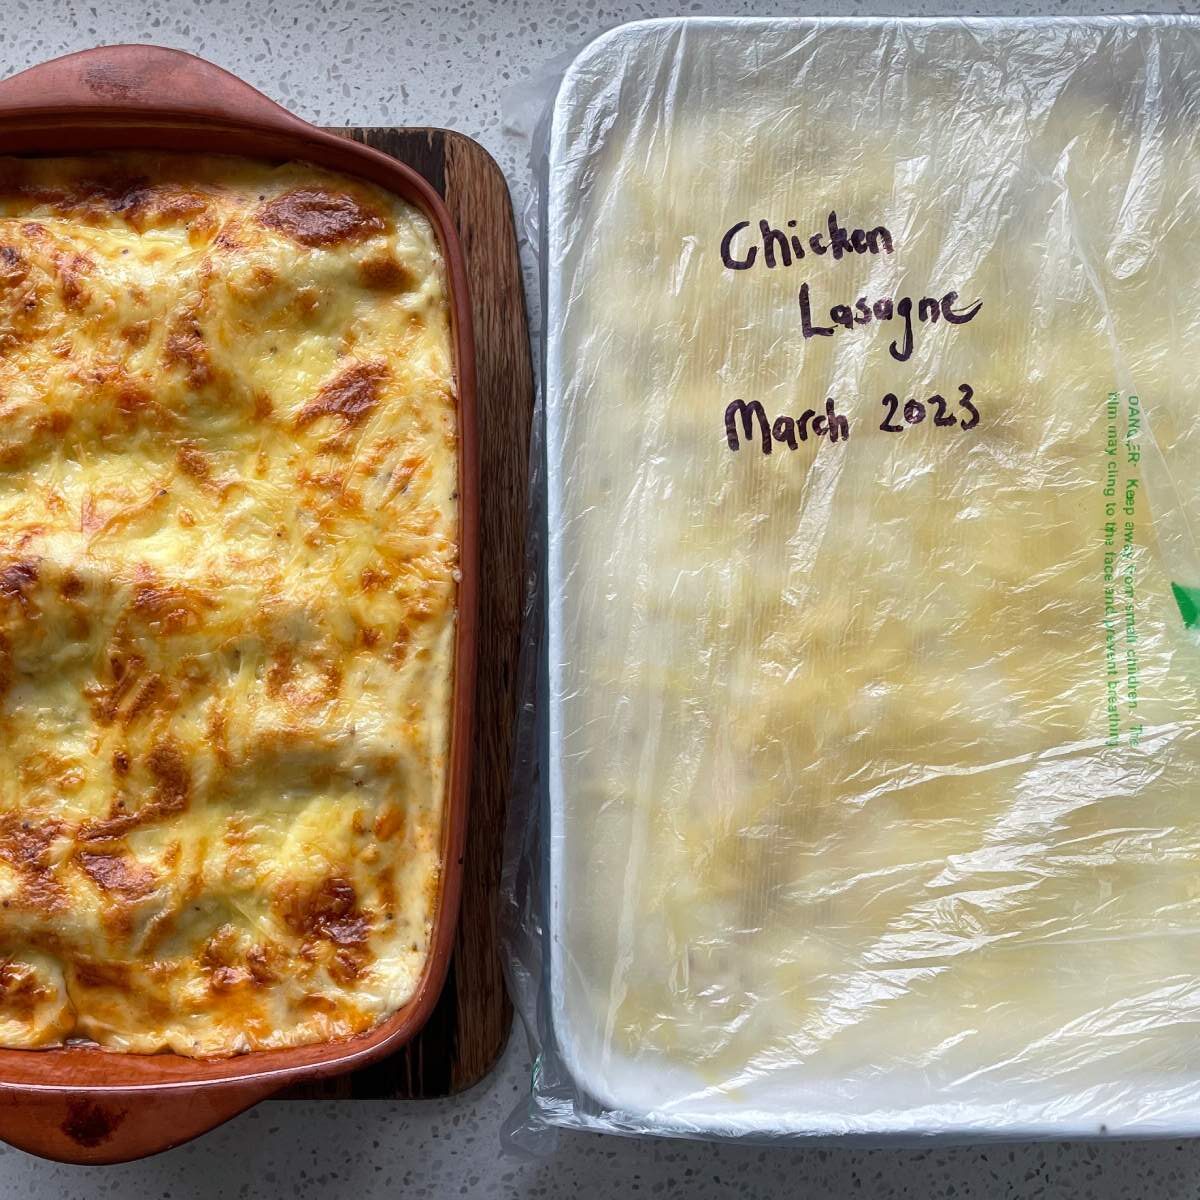 Two Chicken Lasagne on a marble bench. One has been cooked through and the other will be set aside to be frozen.